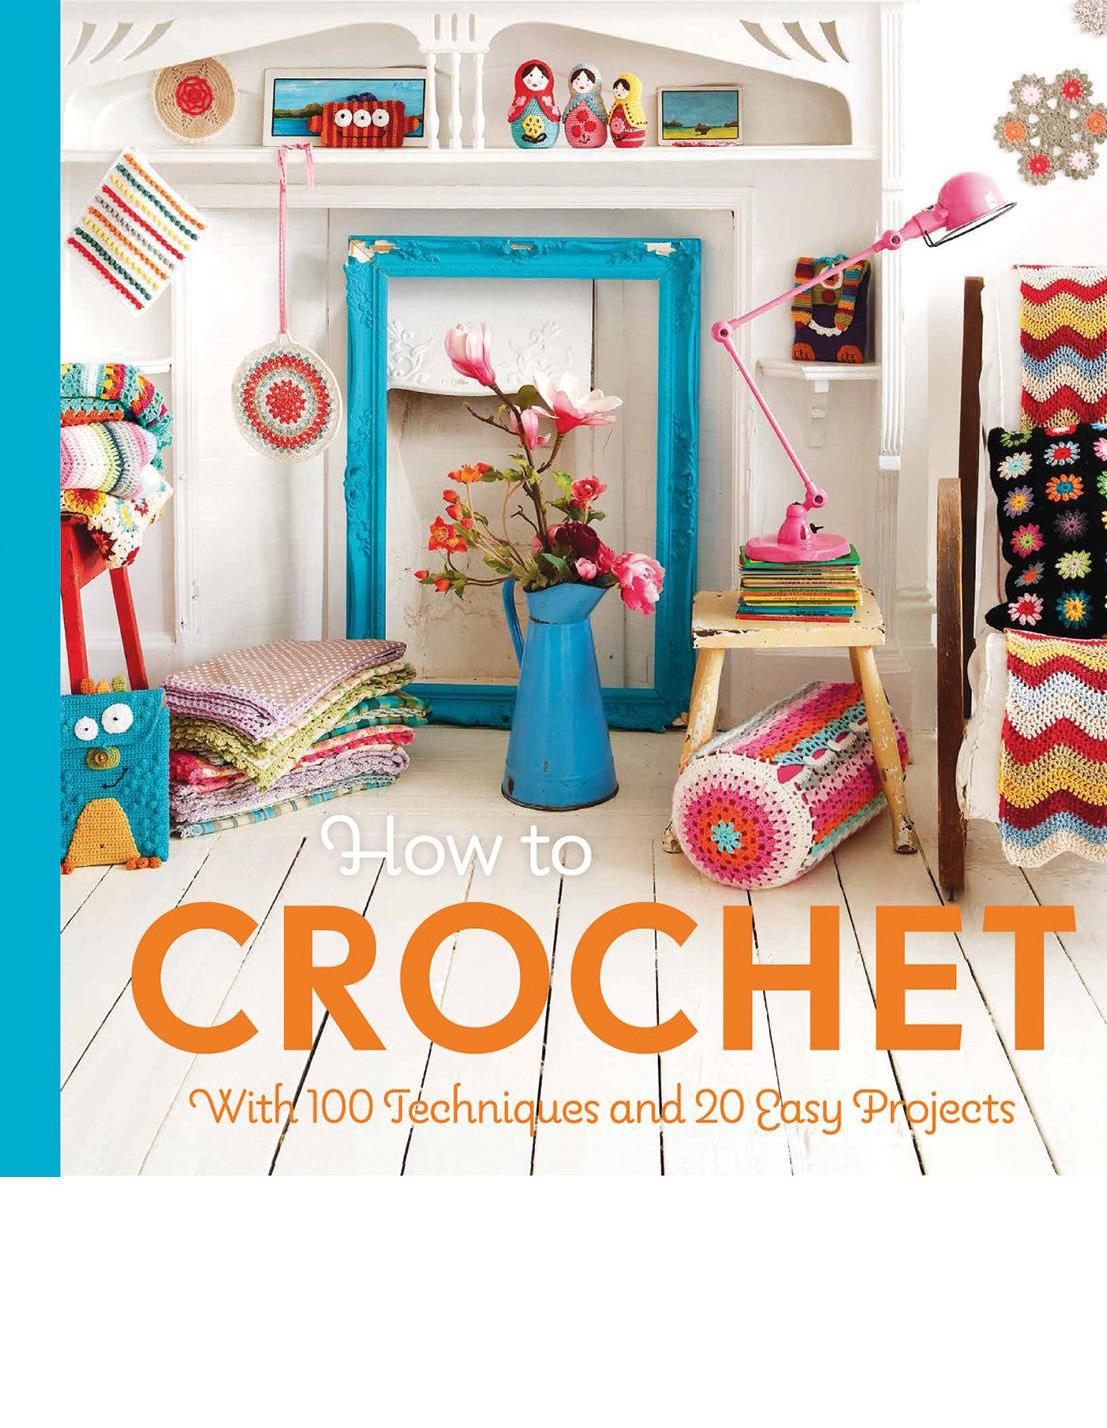 How to Crochet - Pattern Book by Mollie Makes